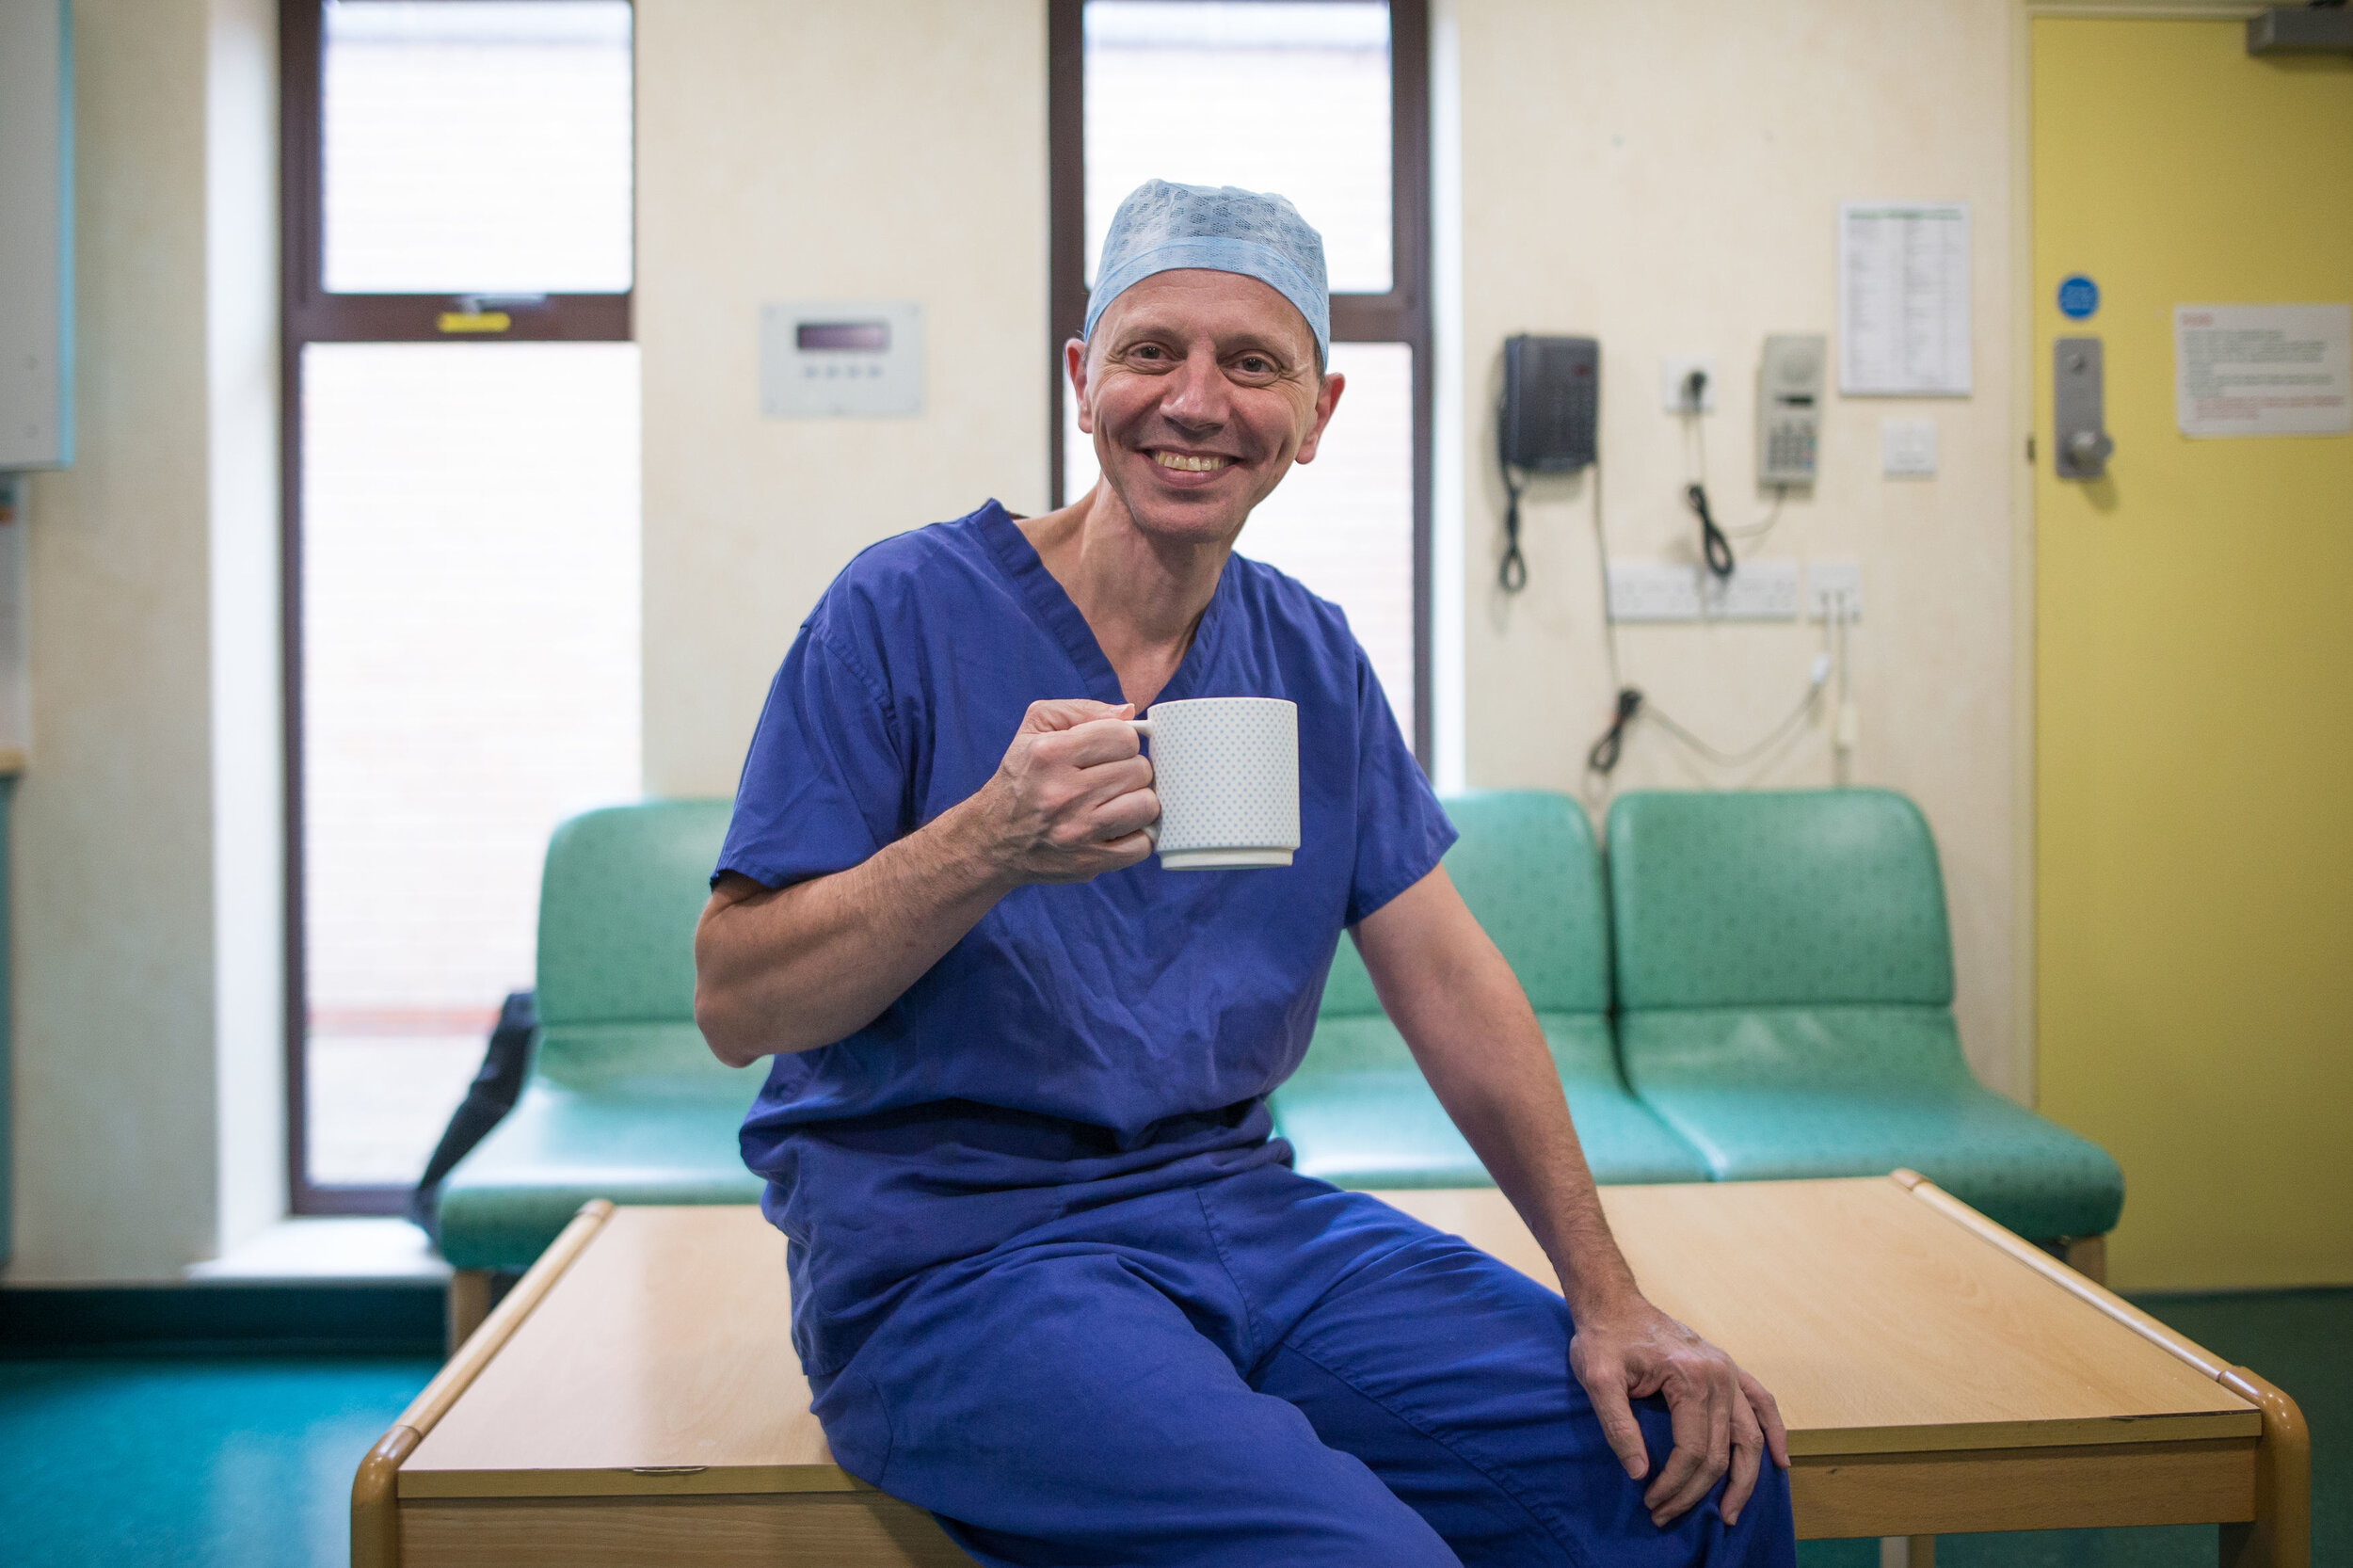  Carlos Heras-Palou, 53, performing hand surgery at Derby Nuffield Hospital. Mr Heras-Palou, an orthopaedic specialist surgeon, may have had his career saved by a new drug called 'Patisiran'. The rare disease, hereditary transthyretin-mediated amyloi